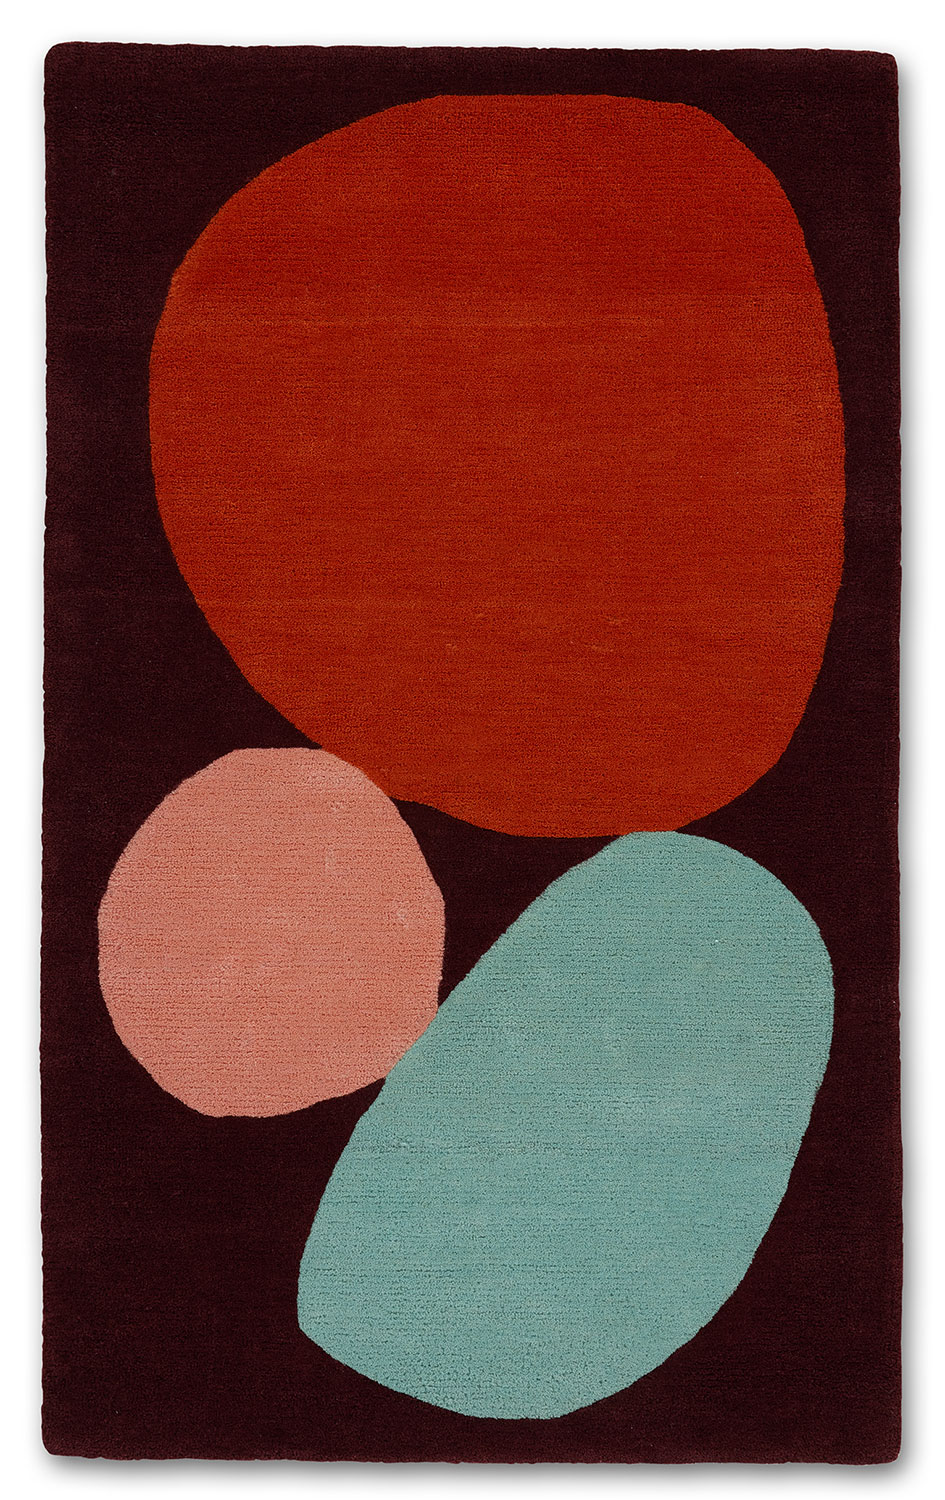 A 3 foot by 5 foot modern rug called Three Stones Rust